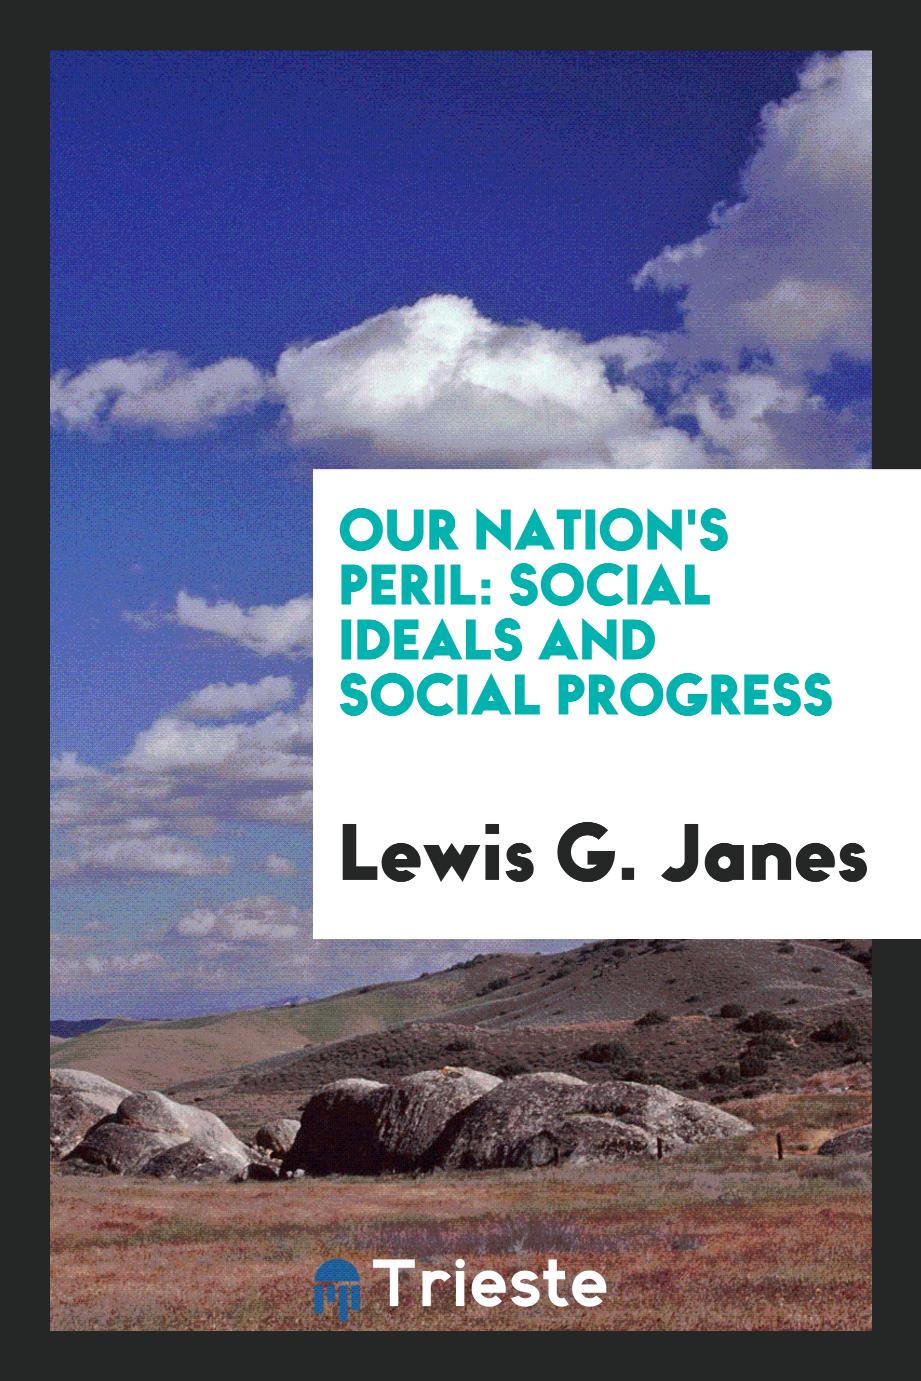 Our Nation's Peril: Social Ideals and Social Progress